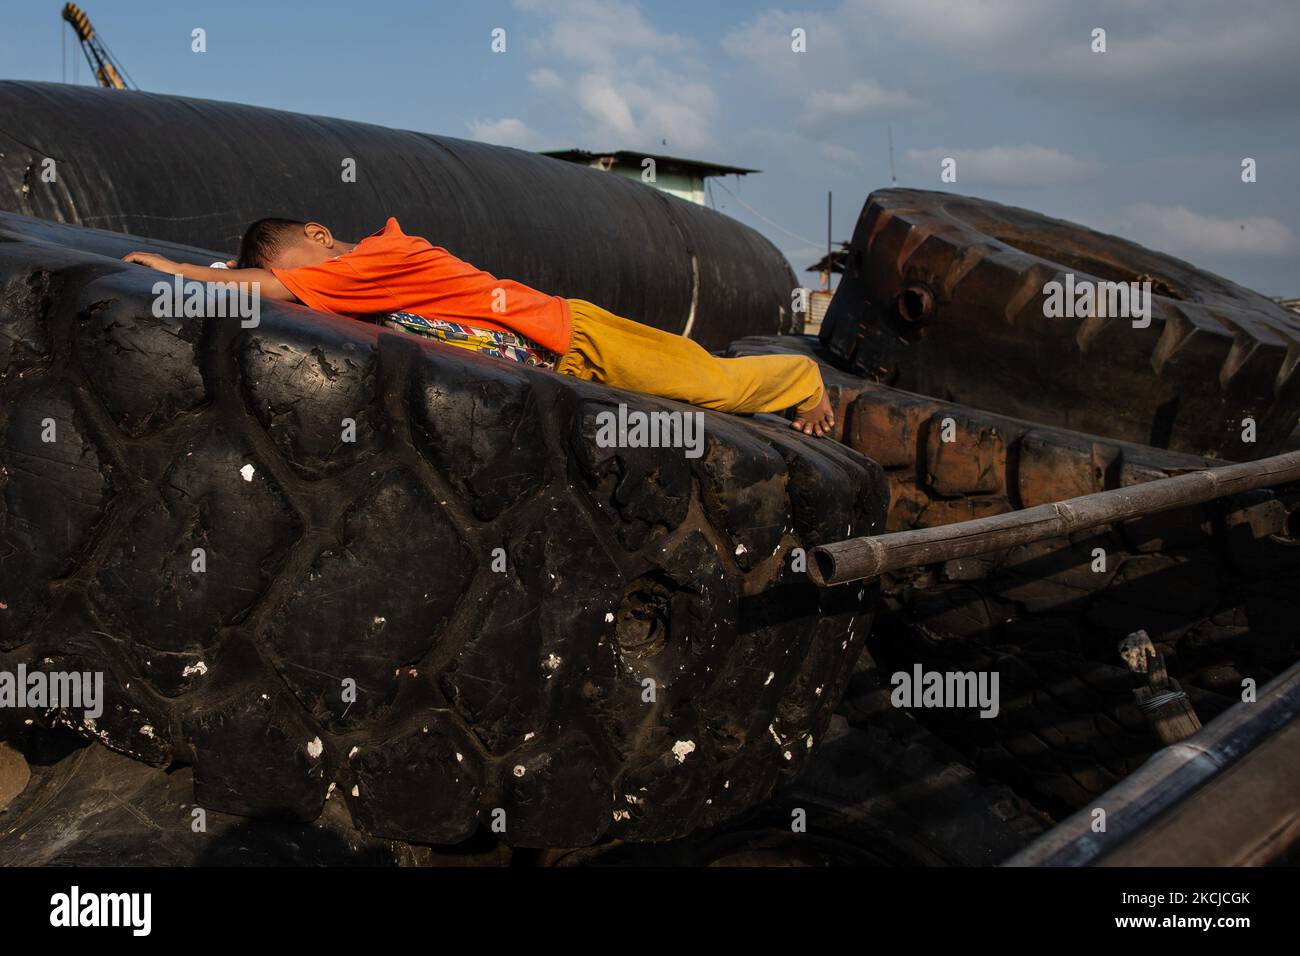 A child sleeps on tires of heavy equipment amid the spread of the coronavirus (COVID-19) outbreak at a slum area in Jakarta on 8 August 2021. UNICEF and the Fiscal Policy Agency (BKF) said more children and adolescents have fallen into poverty than any other age group as a result of the COVID-19 pandemic. These findings are based on a joint study estimating the situation of child poverty during the pandemic. Children under the age of 18 represent about 33 per cent of Indonesia’s population, but nearly 40 per cent of the new people who fell under the poverty line in 2020 due to the pandemic. (P Stock Photo